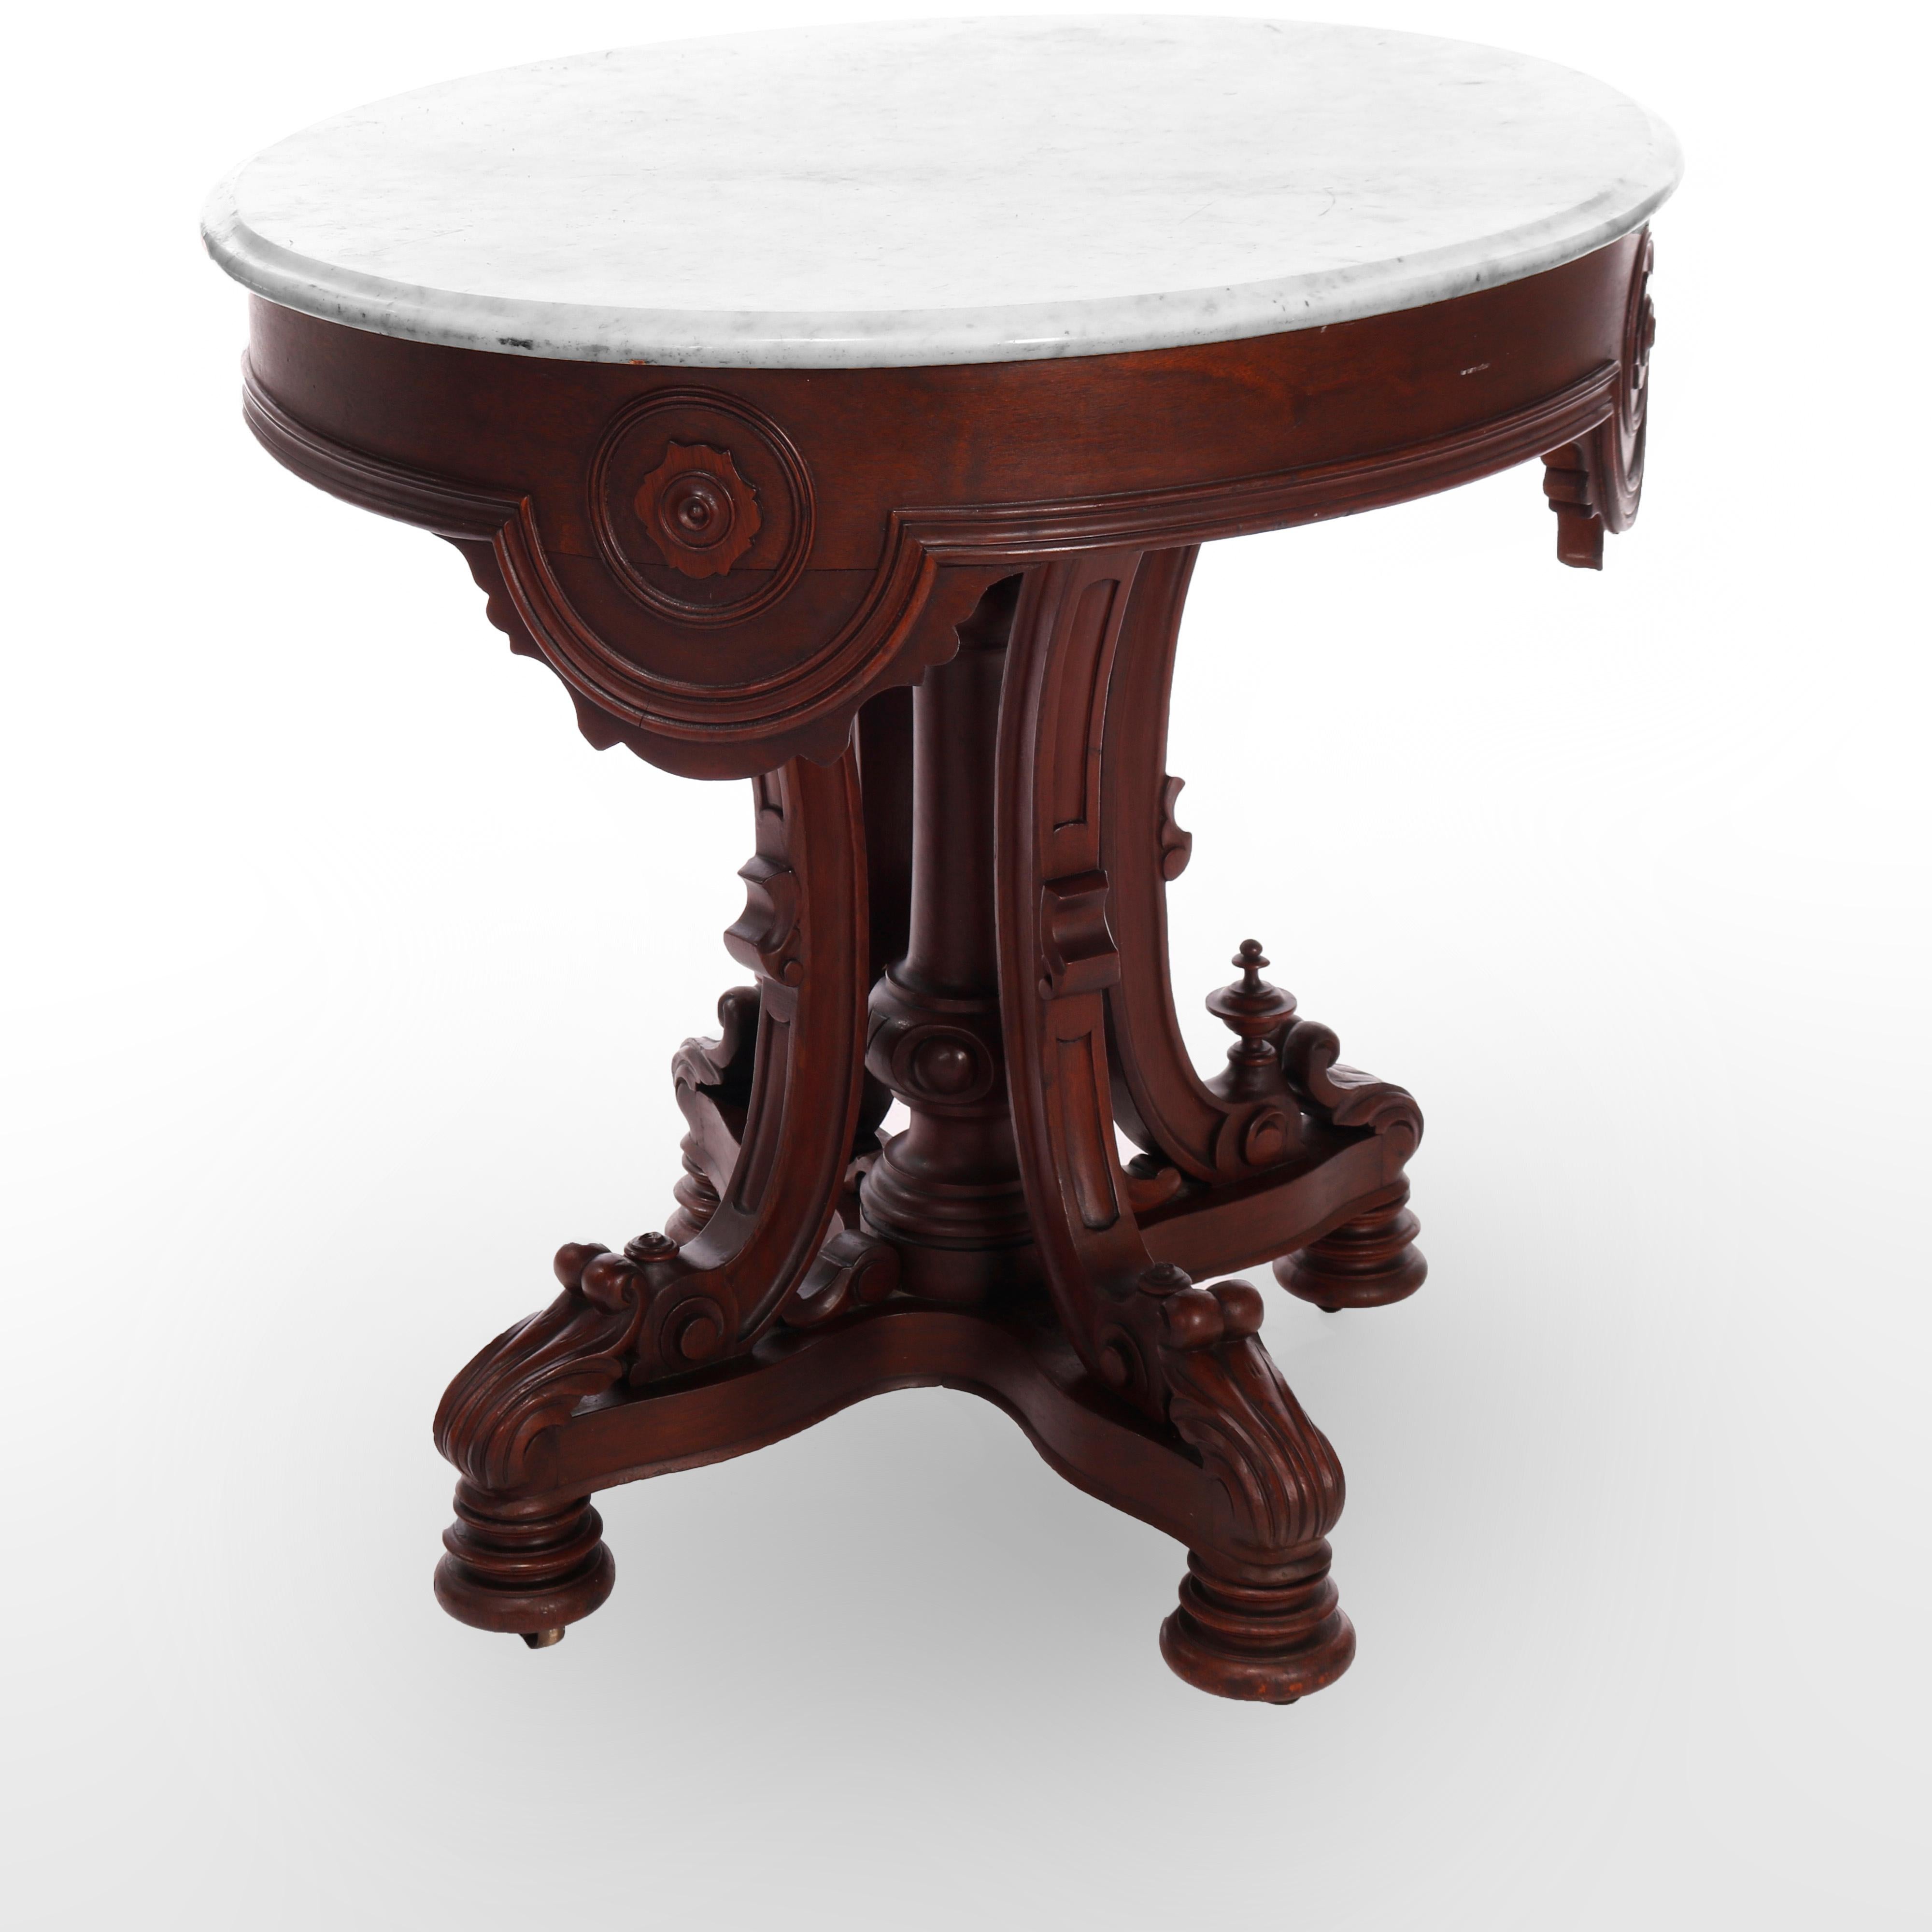 Antique Rococo Revival Carved Rosewood Oval Marble Top Table, Circa 1870 2